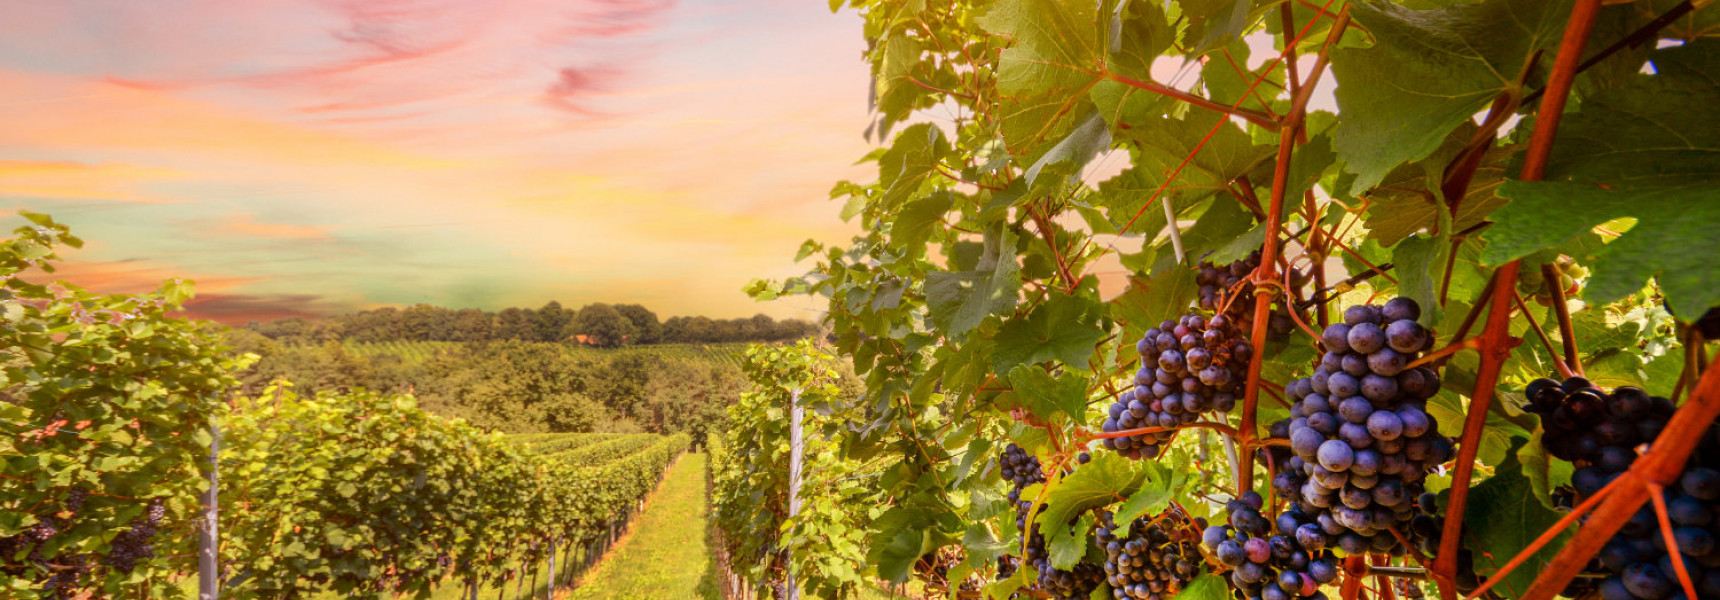 6 of the Best Portugal Wine Regions